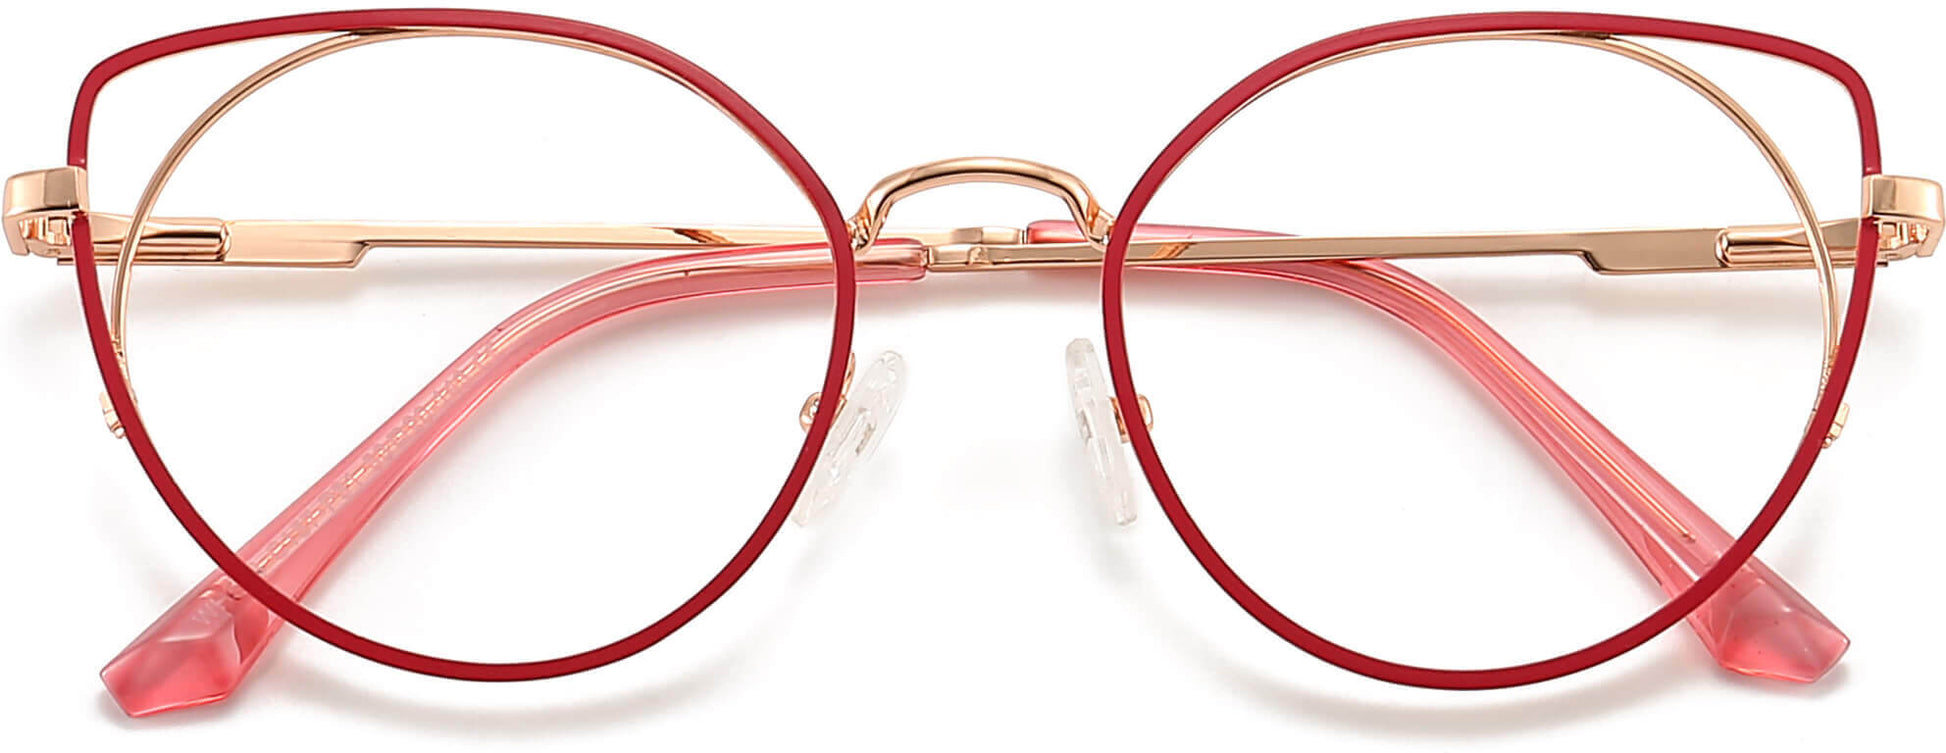 Miko Cateye Red Eyeglasses from ANRRI, closed view